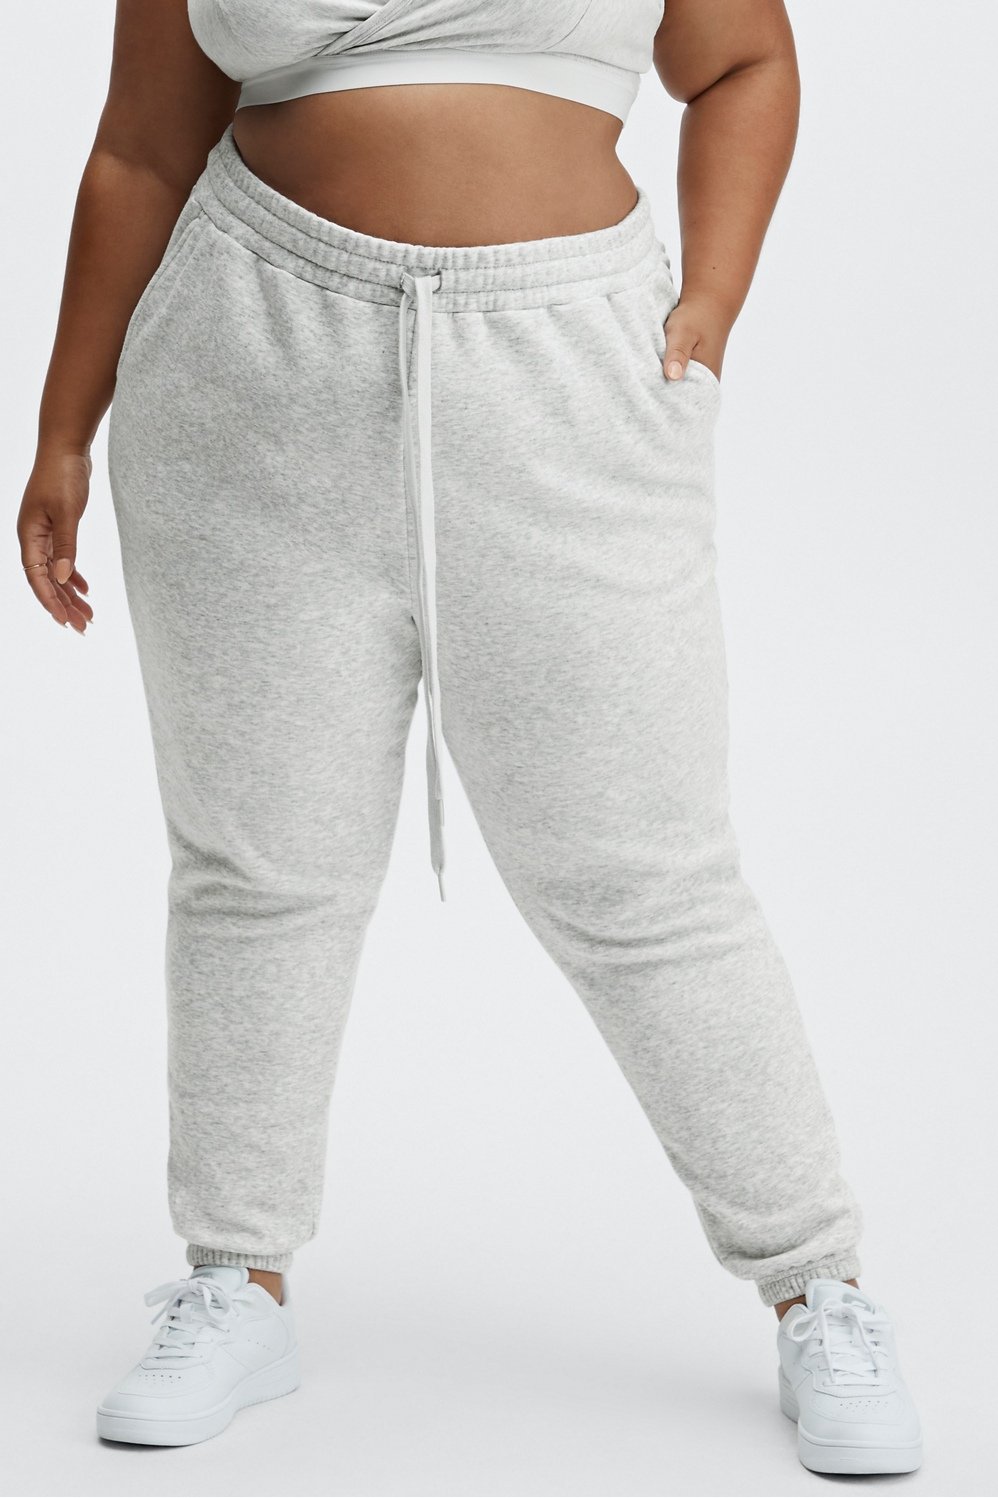 Joggers and Athletic Bottoms – Tilden Co. LLC